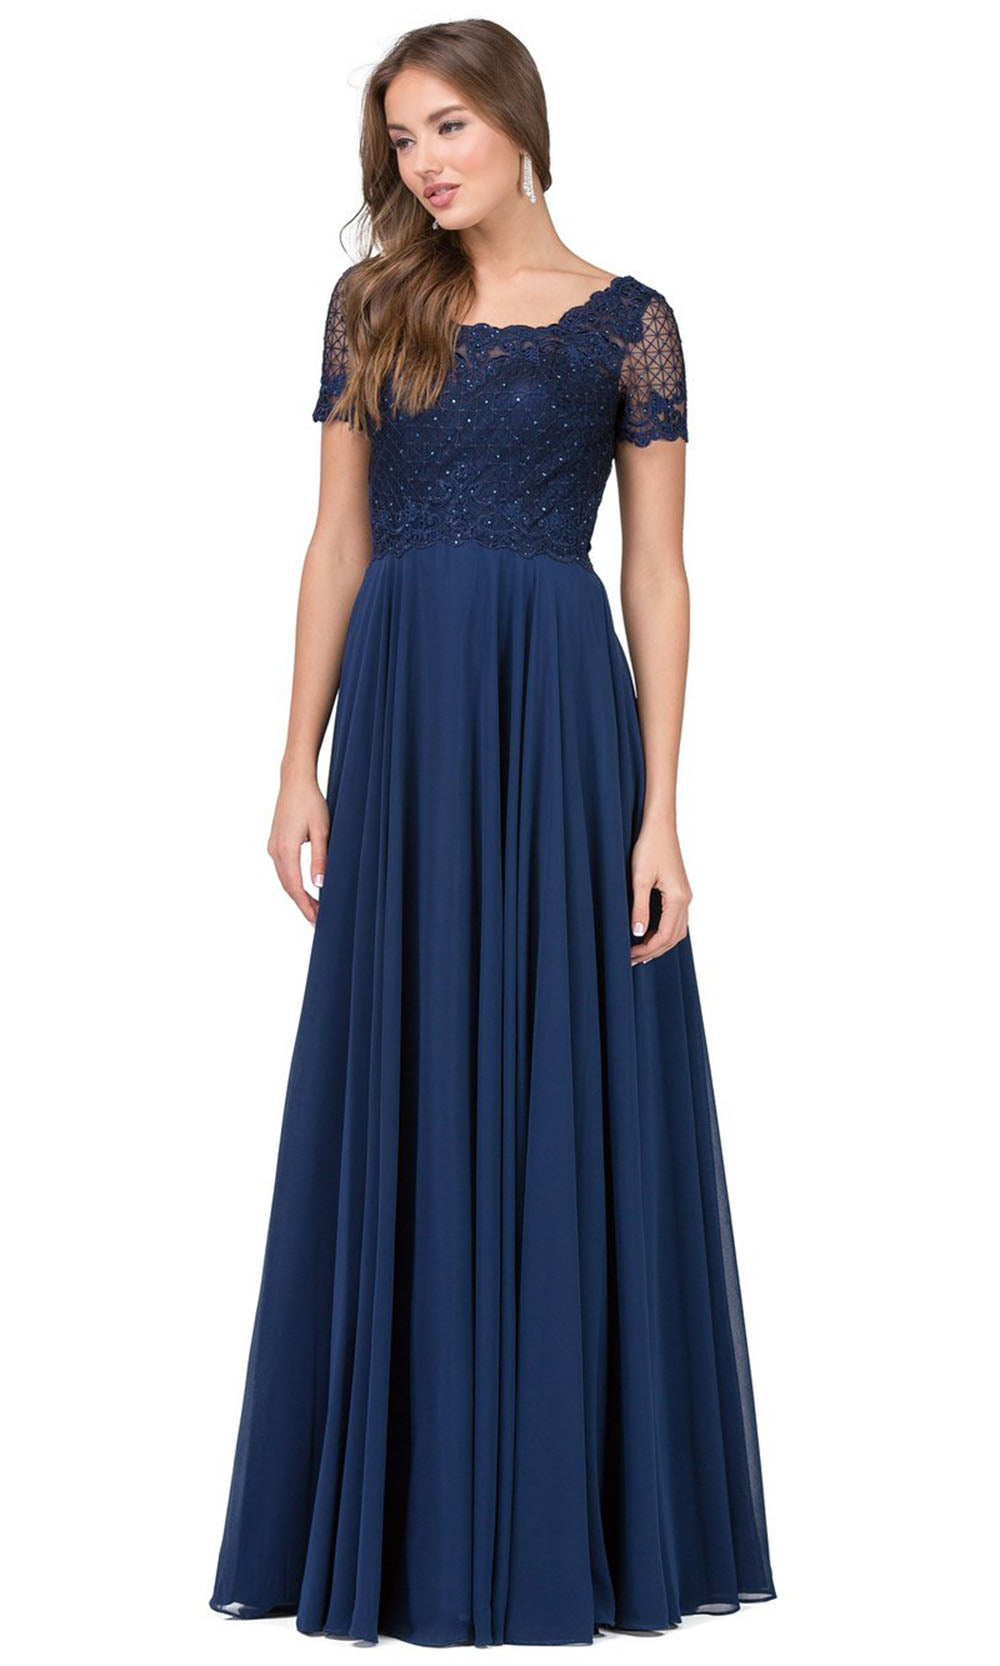 Dancing Queen - 2268 Embroidered Scoop Neck A-Line Gown In Blue